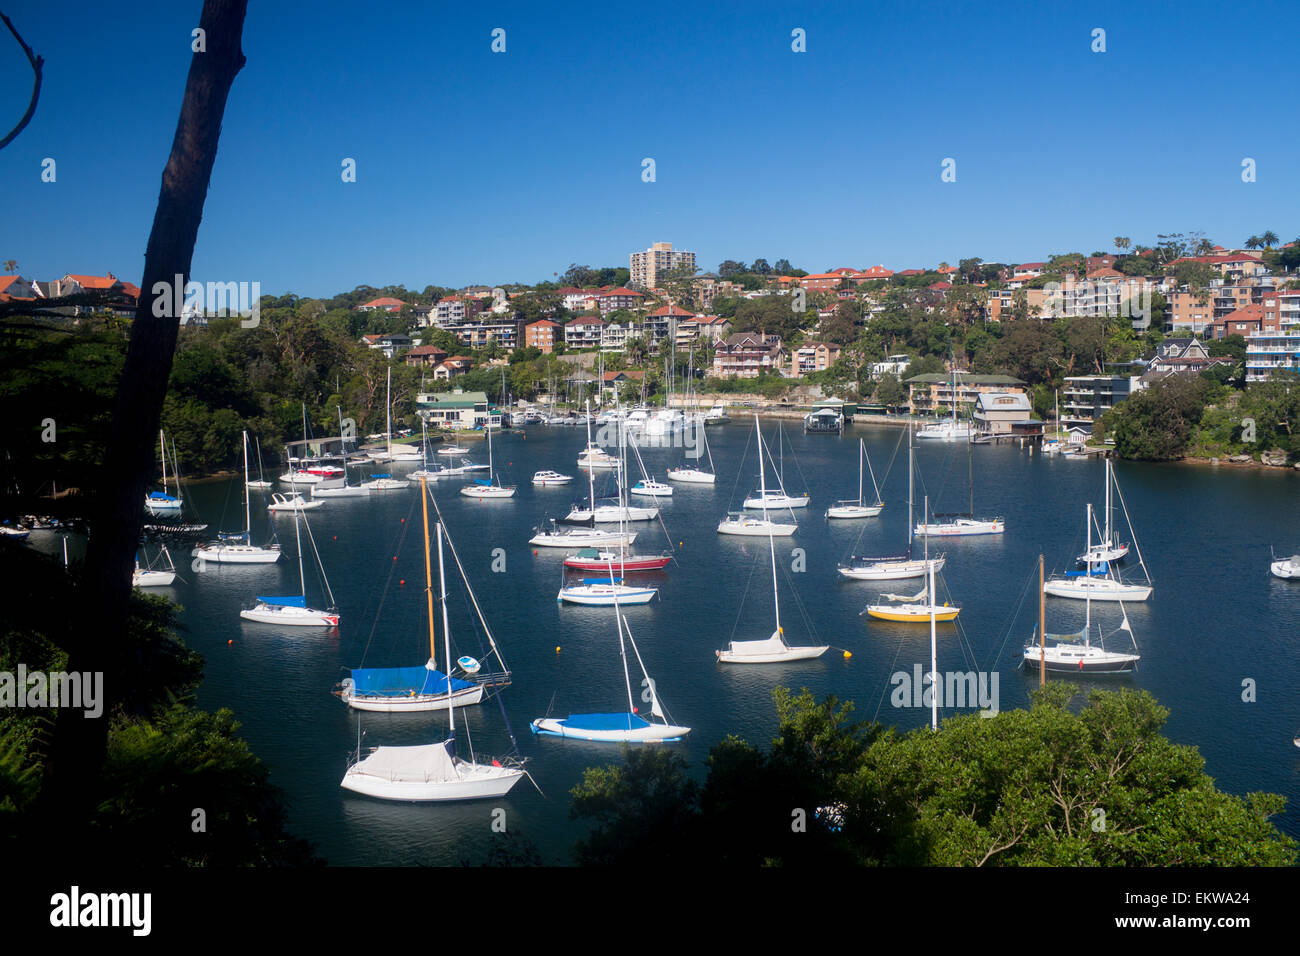 Mosman Harbour or Mosman Bay with boats North Shore suburbs Sydney New South Wales NSW Australia Stock Photo